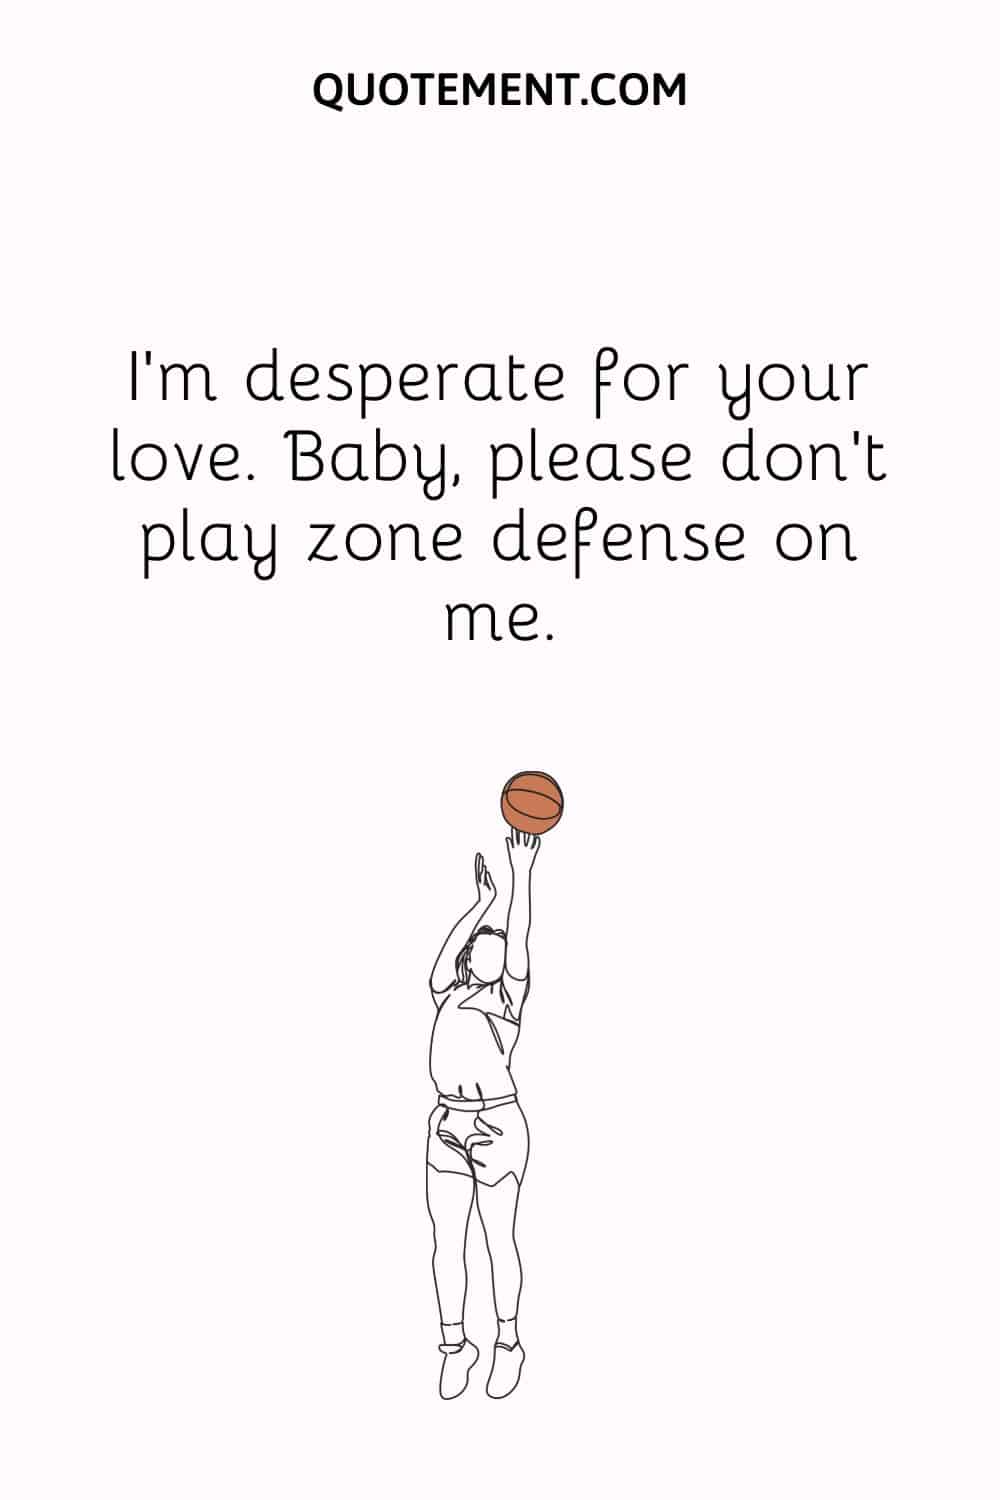 I’m desperate for your love. Baby, please don’t play zone defense on me.